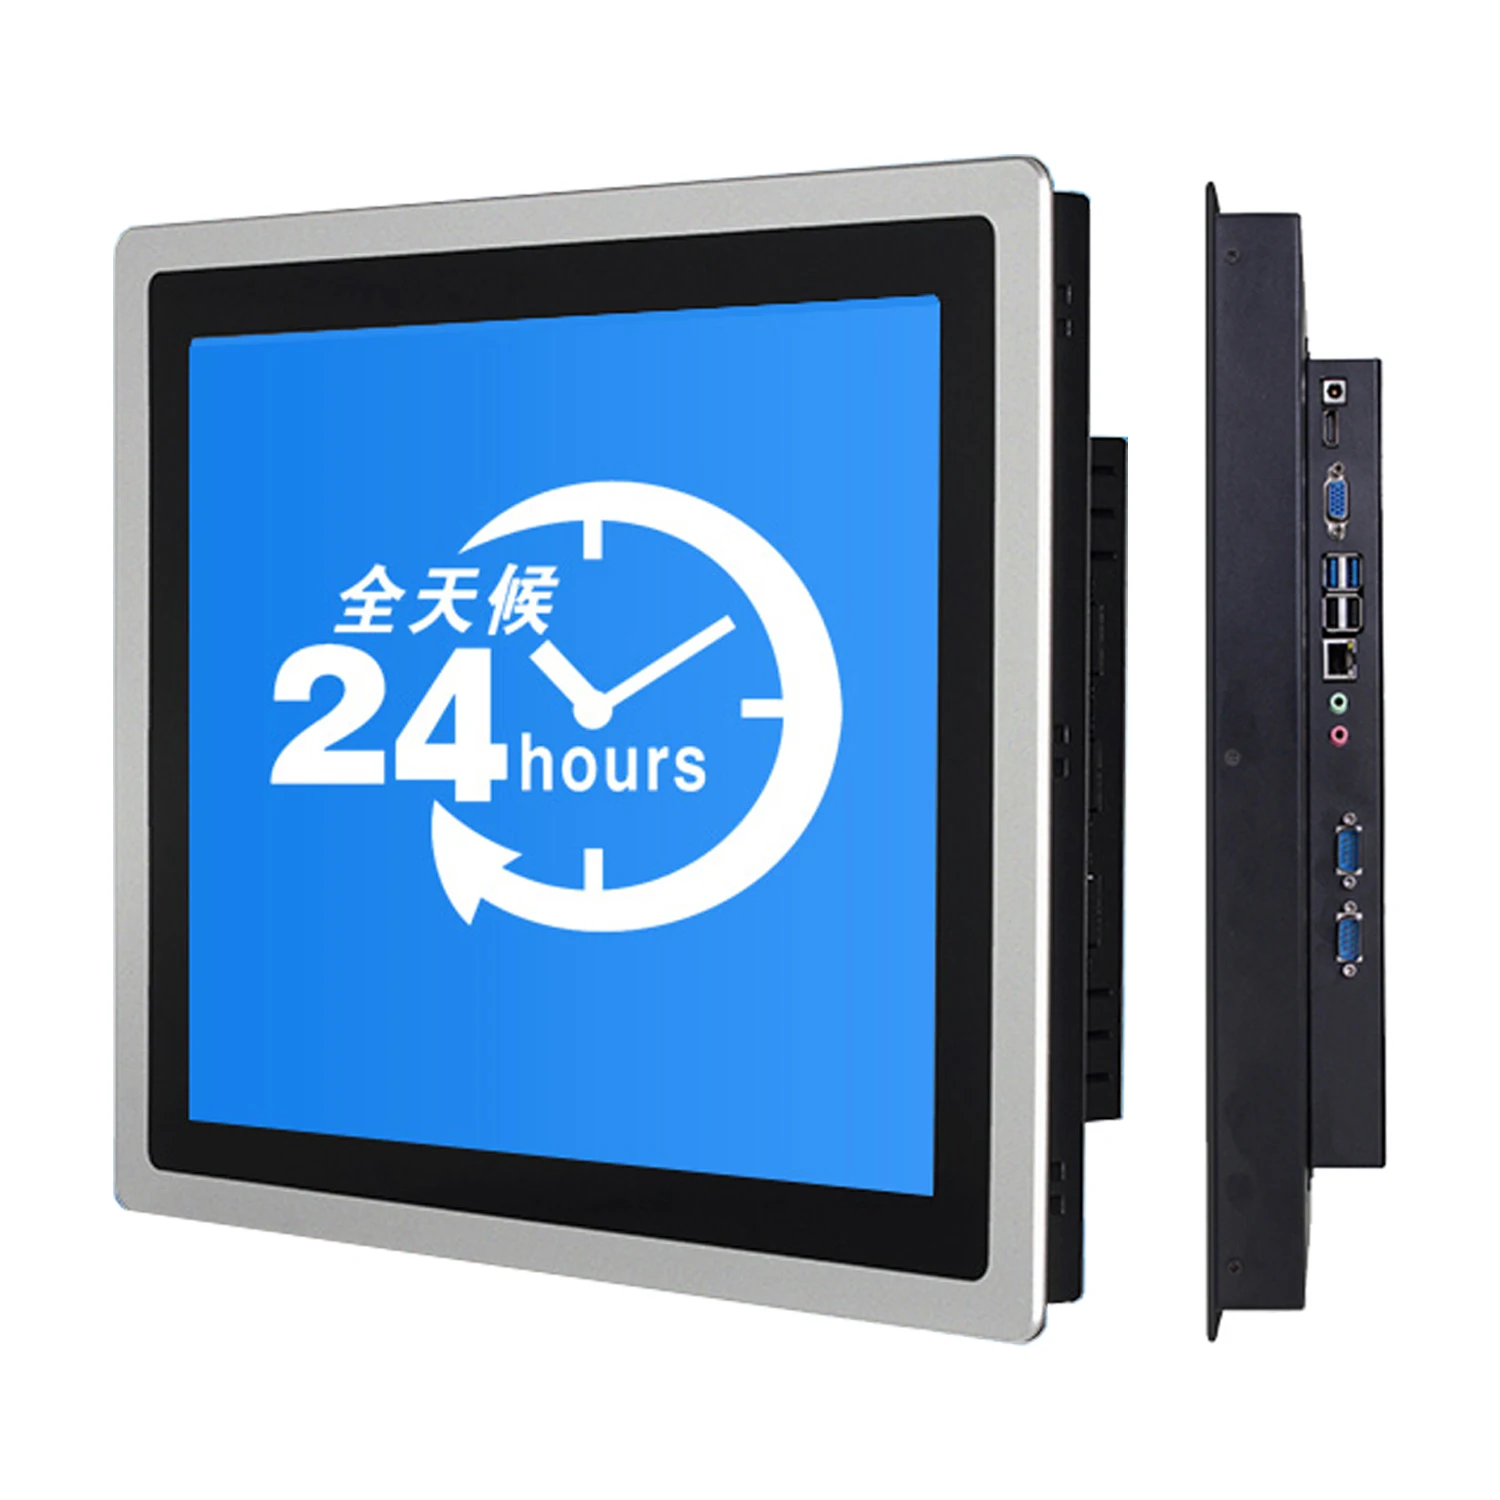 17 21 Inch Embedded All-in-one PC 19